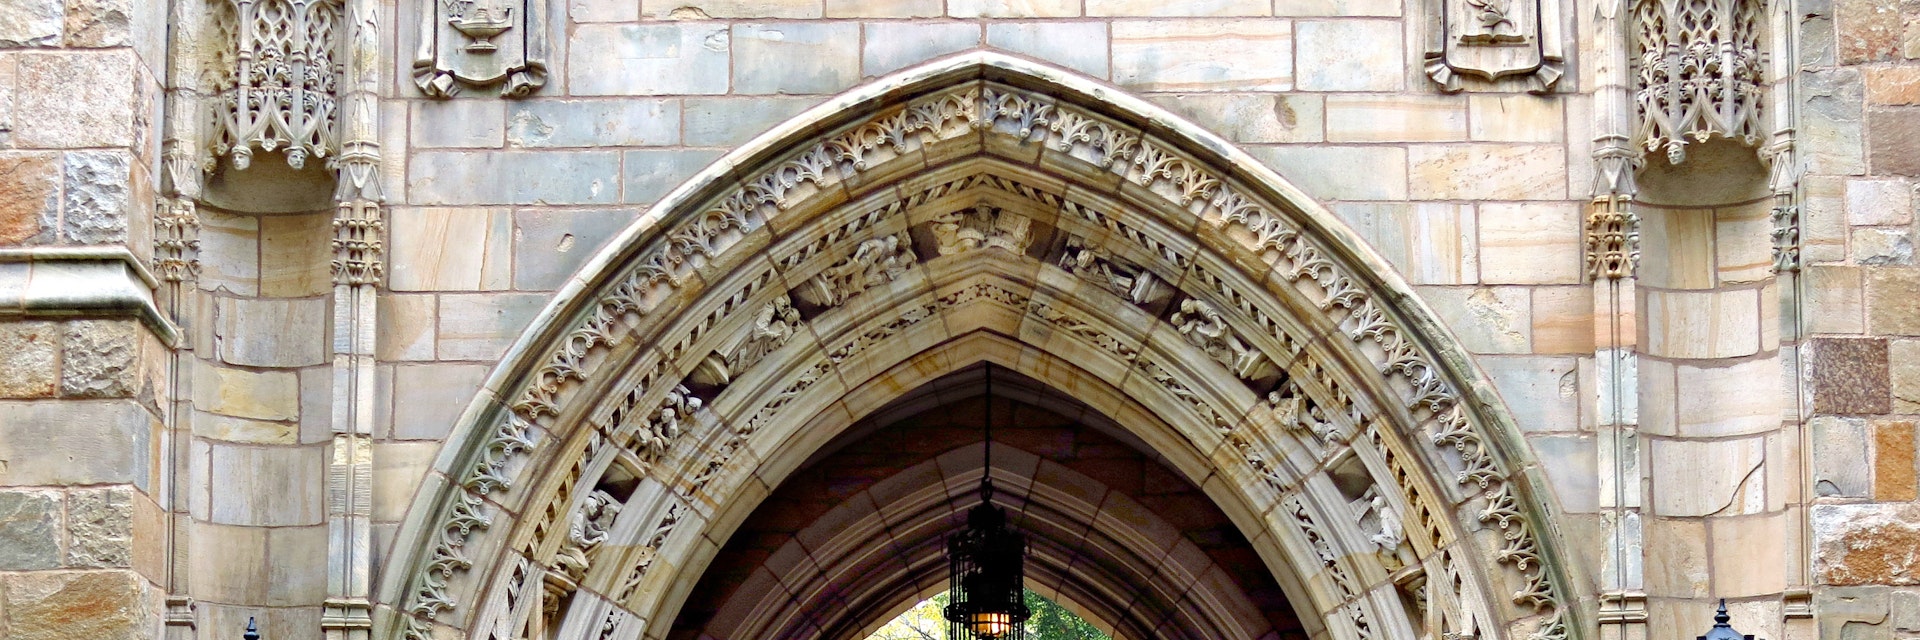 This decorative iron gate is the entrance to the Memorial Quadrangle on the campus of Yale University. The gate beneath Harkness Tower, crafted by Samuel Yellin, is the most ornate of his many works at Yale.